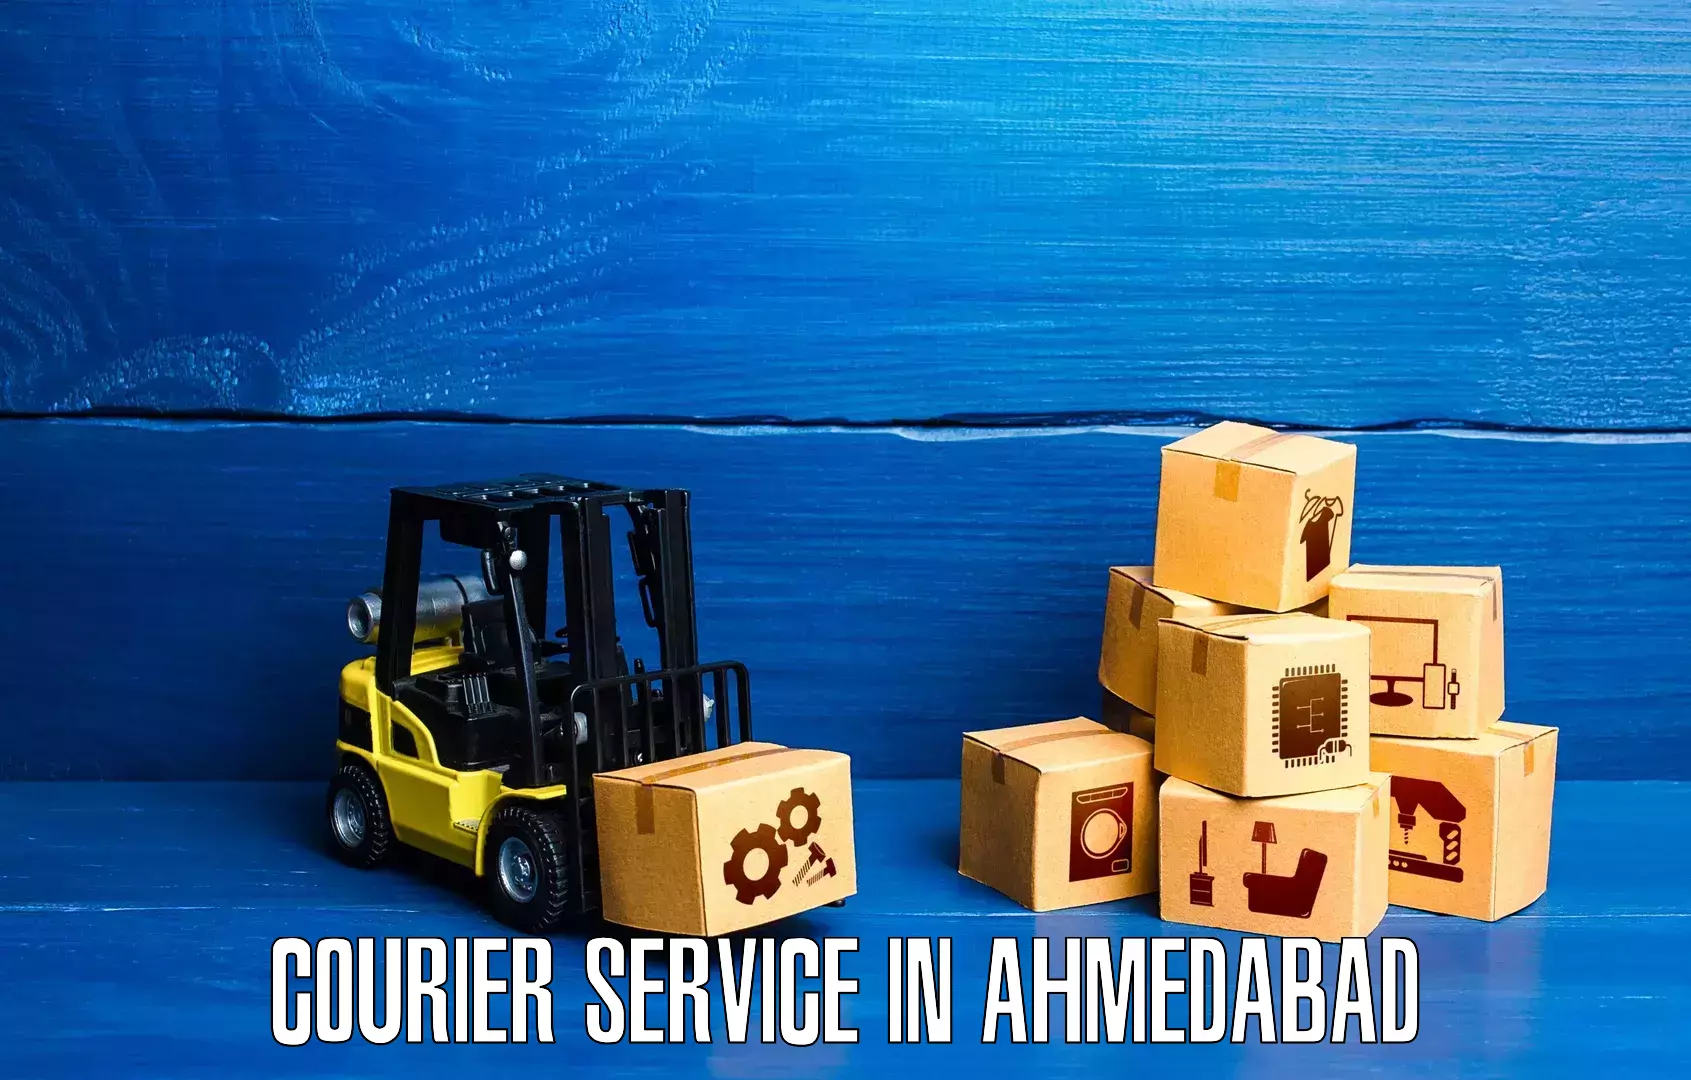 Flexible delivery scheduling in Ahmedabad